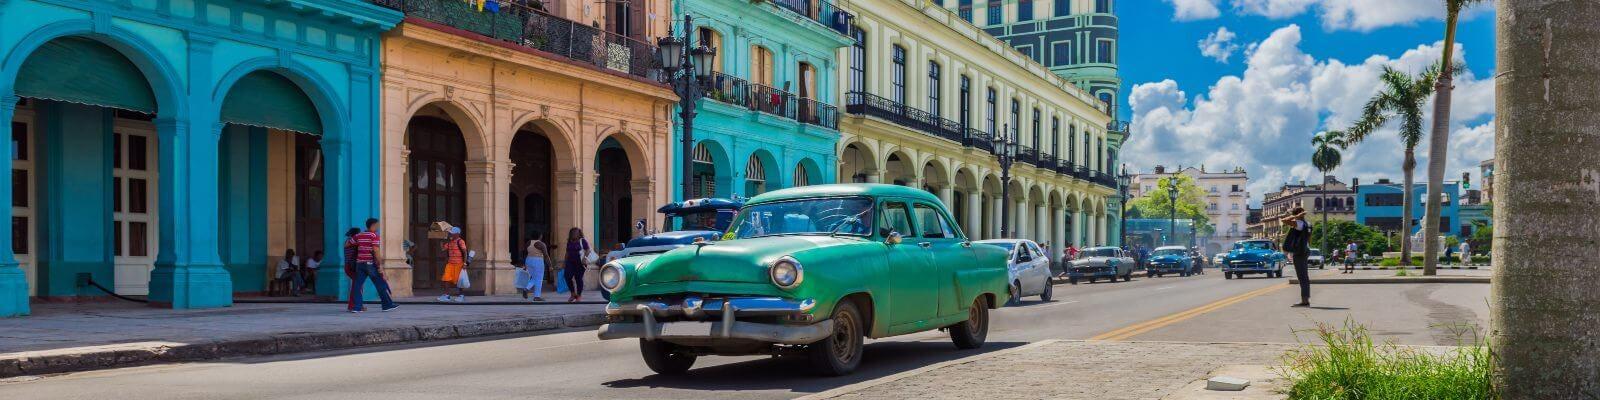 Street and cars in Cuba